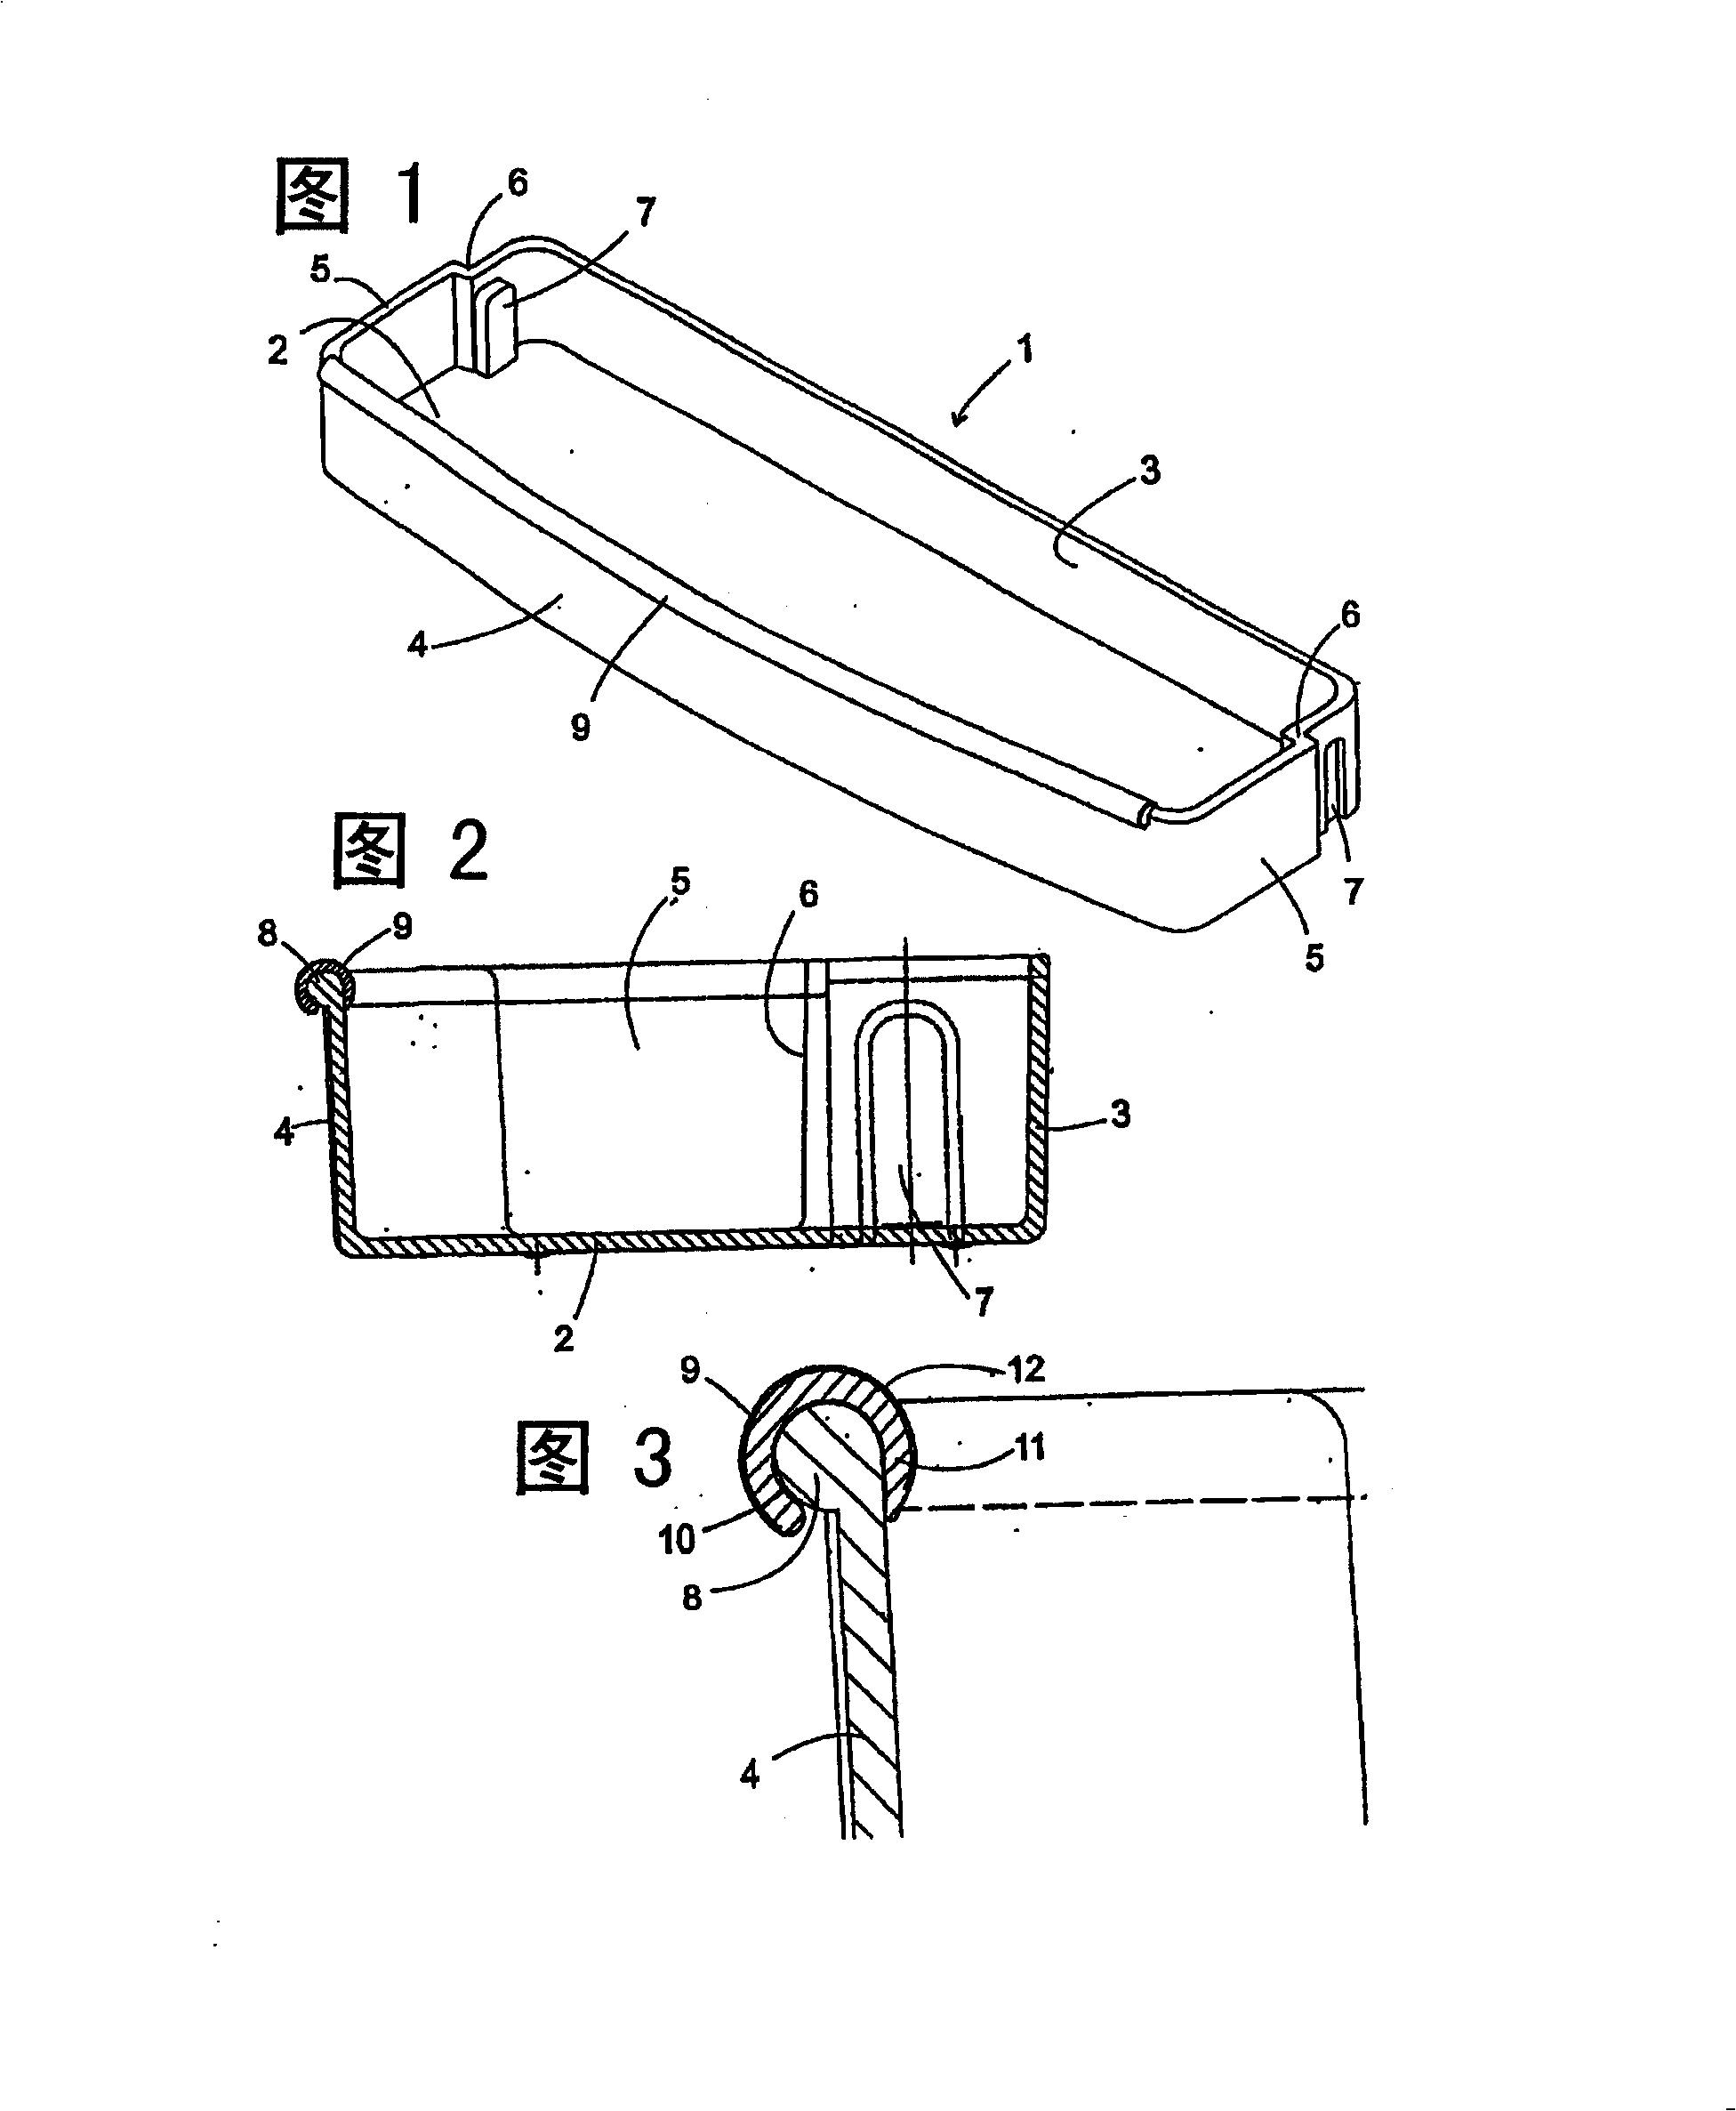 Refrigerator having a compartment for accommodating articles that are to be cooled